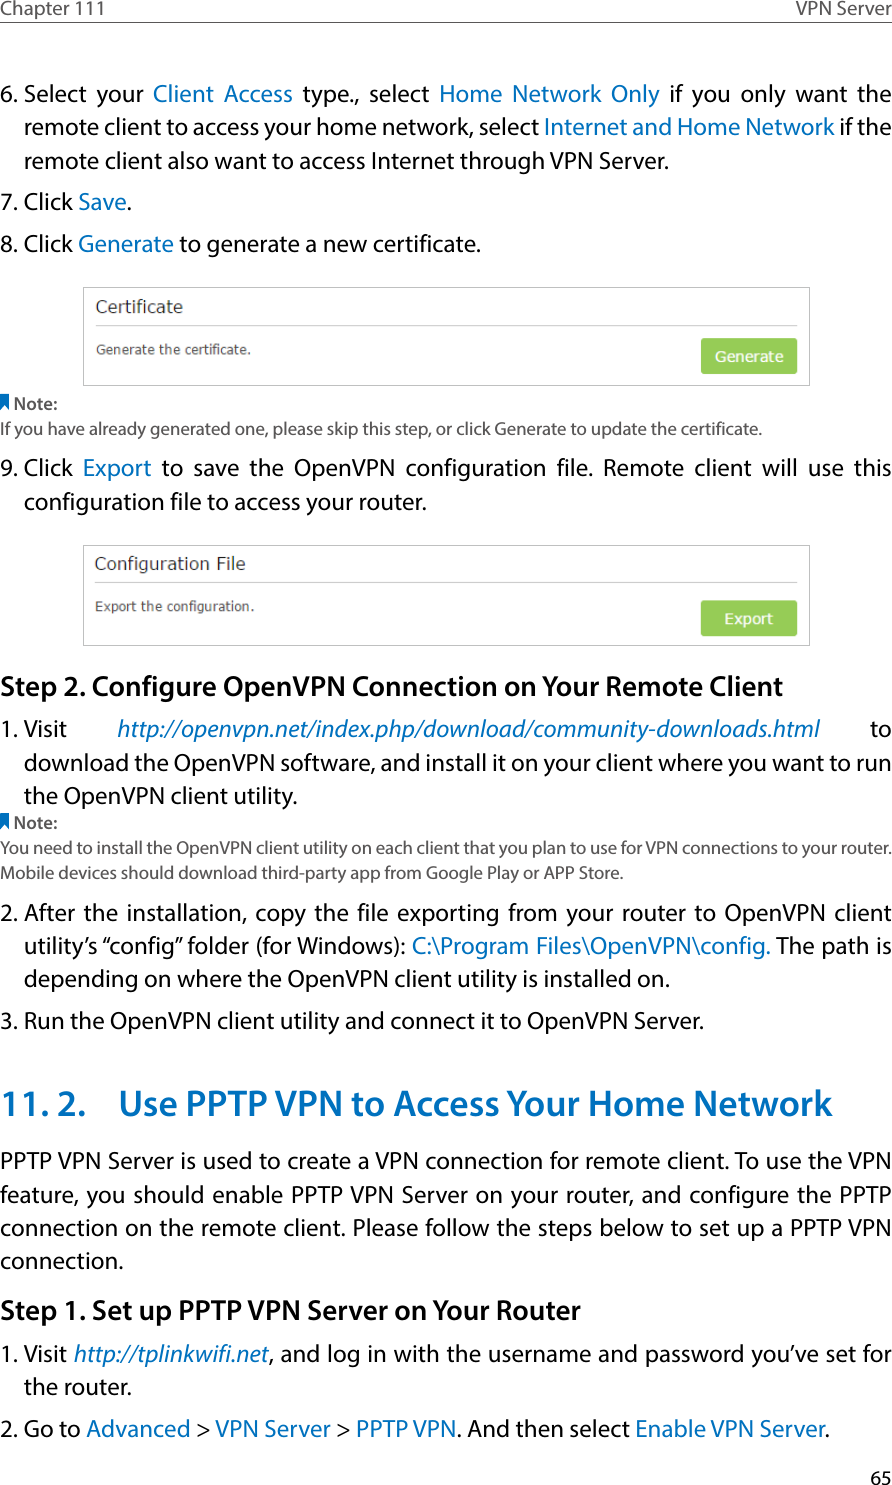 65Chapter 111 VPN Server6. Select your Client Access type., select Home Network Only if you only want the remote client to access your home network, select Internet and Home Network if the remote client also want to access Internet through VPN Server.7. Click Save.8. Click Generate to generate a new certificate. Note:If you have already generated one, please skip this step, or click Generate to update the certificate.9. Click  Export to save the OpenVPN configuration file. Remote client will use this configuration file to access your router.Step 2. Configure OpenVPN Connection on Your Remote Client1. Visit  http://openvpn.net/index.php/download/community-downloads.html to download the OpenVPN software, and install it on your client where you want to run the OpenVPN client utility.Note:You need to install the OpenVPN client utility on each client that you plan to use for VPN connections to your router. Mobile devices should download third-party app from Google Play or APP Store.2. After the installation, copy the file exporting from your router to OpenVPN client utility’s “config” folder (for Windows): C:\Program Files\OpenVPN\config. The path is depending on where the OpenVPN client utility is installed on.3. Run the OpenVPN client utility and connect it to OpenVPN Server.11. 2.  Use PPTP VPN to Access Your Home NetworkPPTP VPN Server is used to create a VPN connection for remote client. To use the VPN feature, you should enable PPTP VPN Server on your router, and configure the PPTP connection on the remote client. Please follow the steps below to set up a PPTP VPN connection.Step 1. Set up PPTP VPN Server on Your Router1. Visit http://tplinkwifi.net, and log in with the username and password you’ve set for the router.2. Go to Advanced &gt; VPN Server &gt; PPTP VPN. And then select Enable VPN Server.